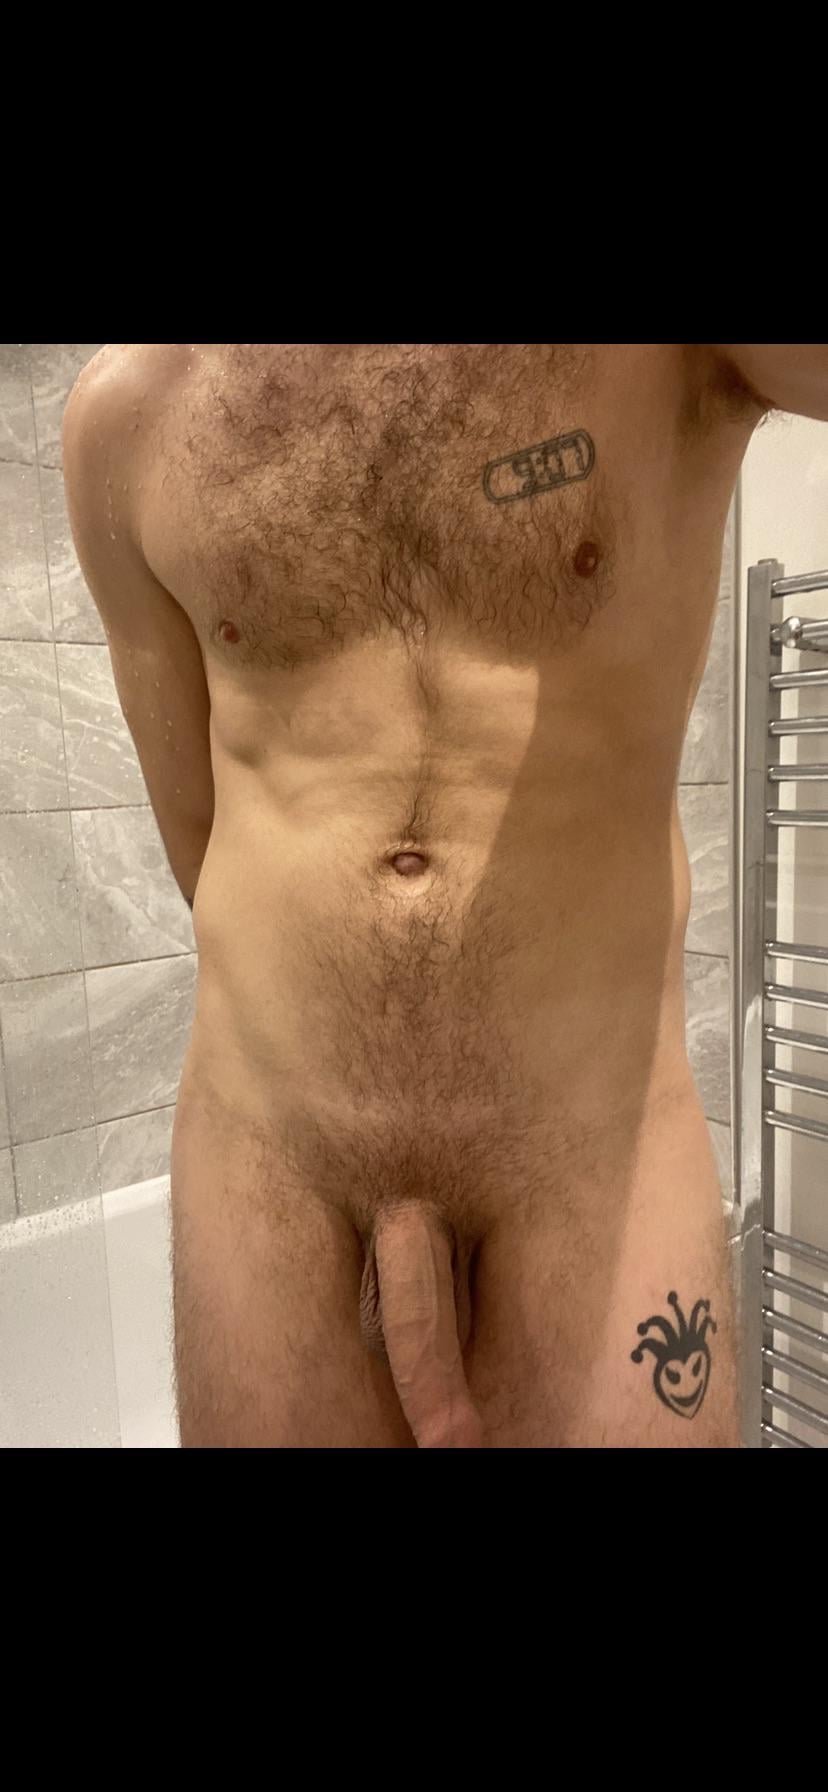 Does my big dick scare or excite you